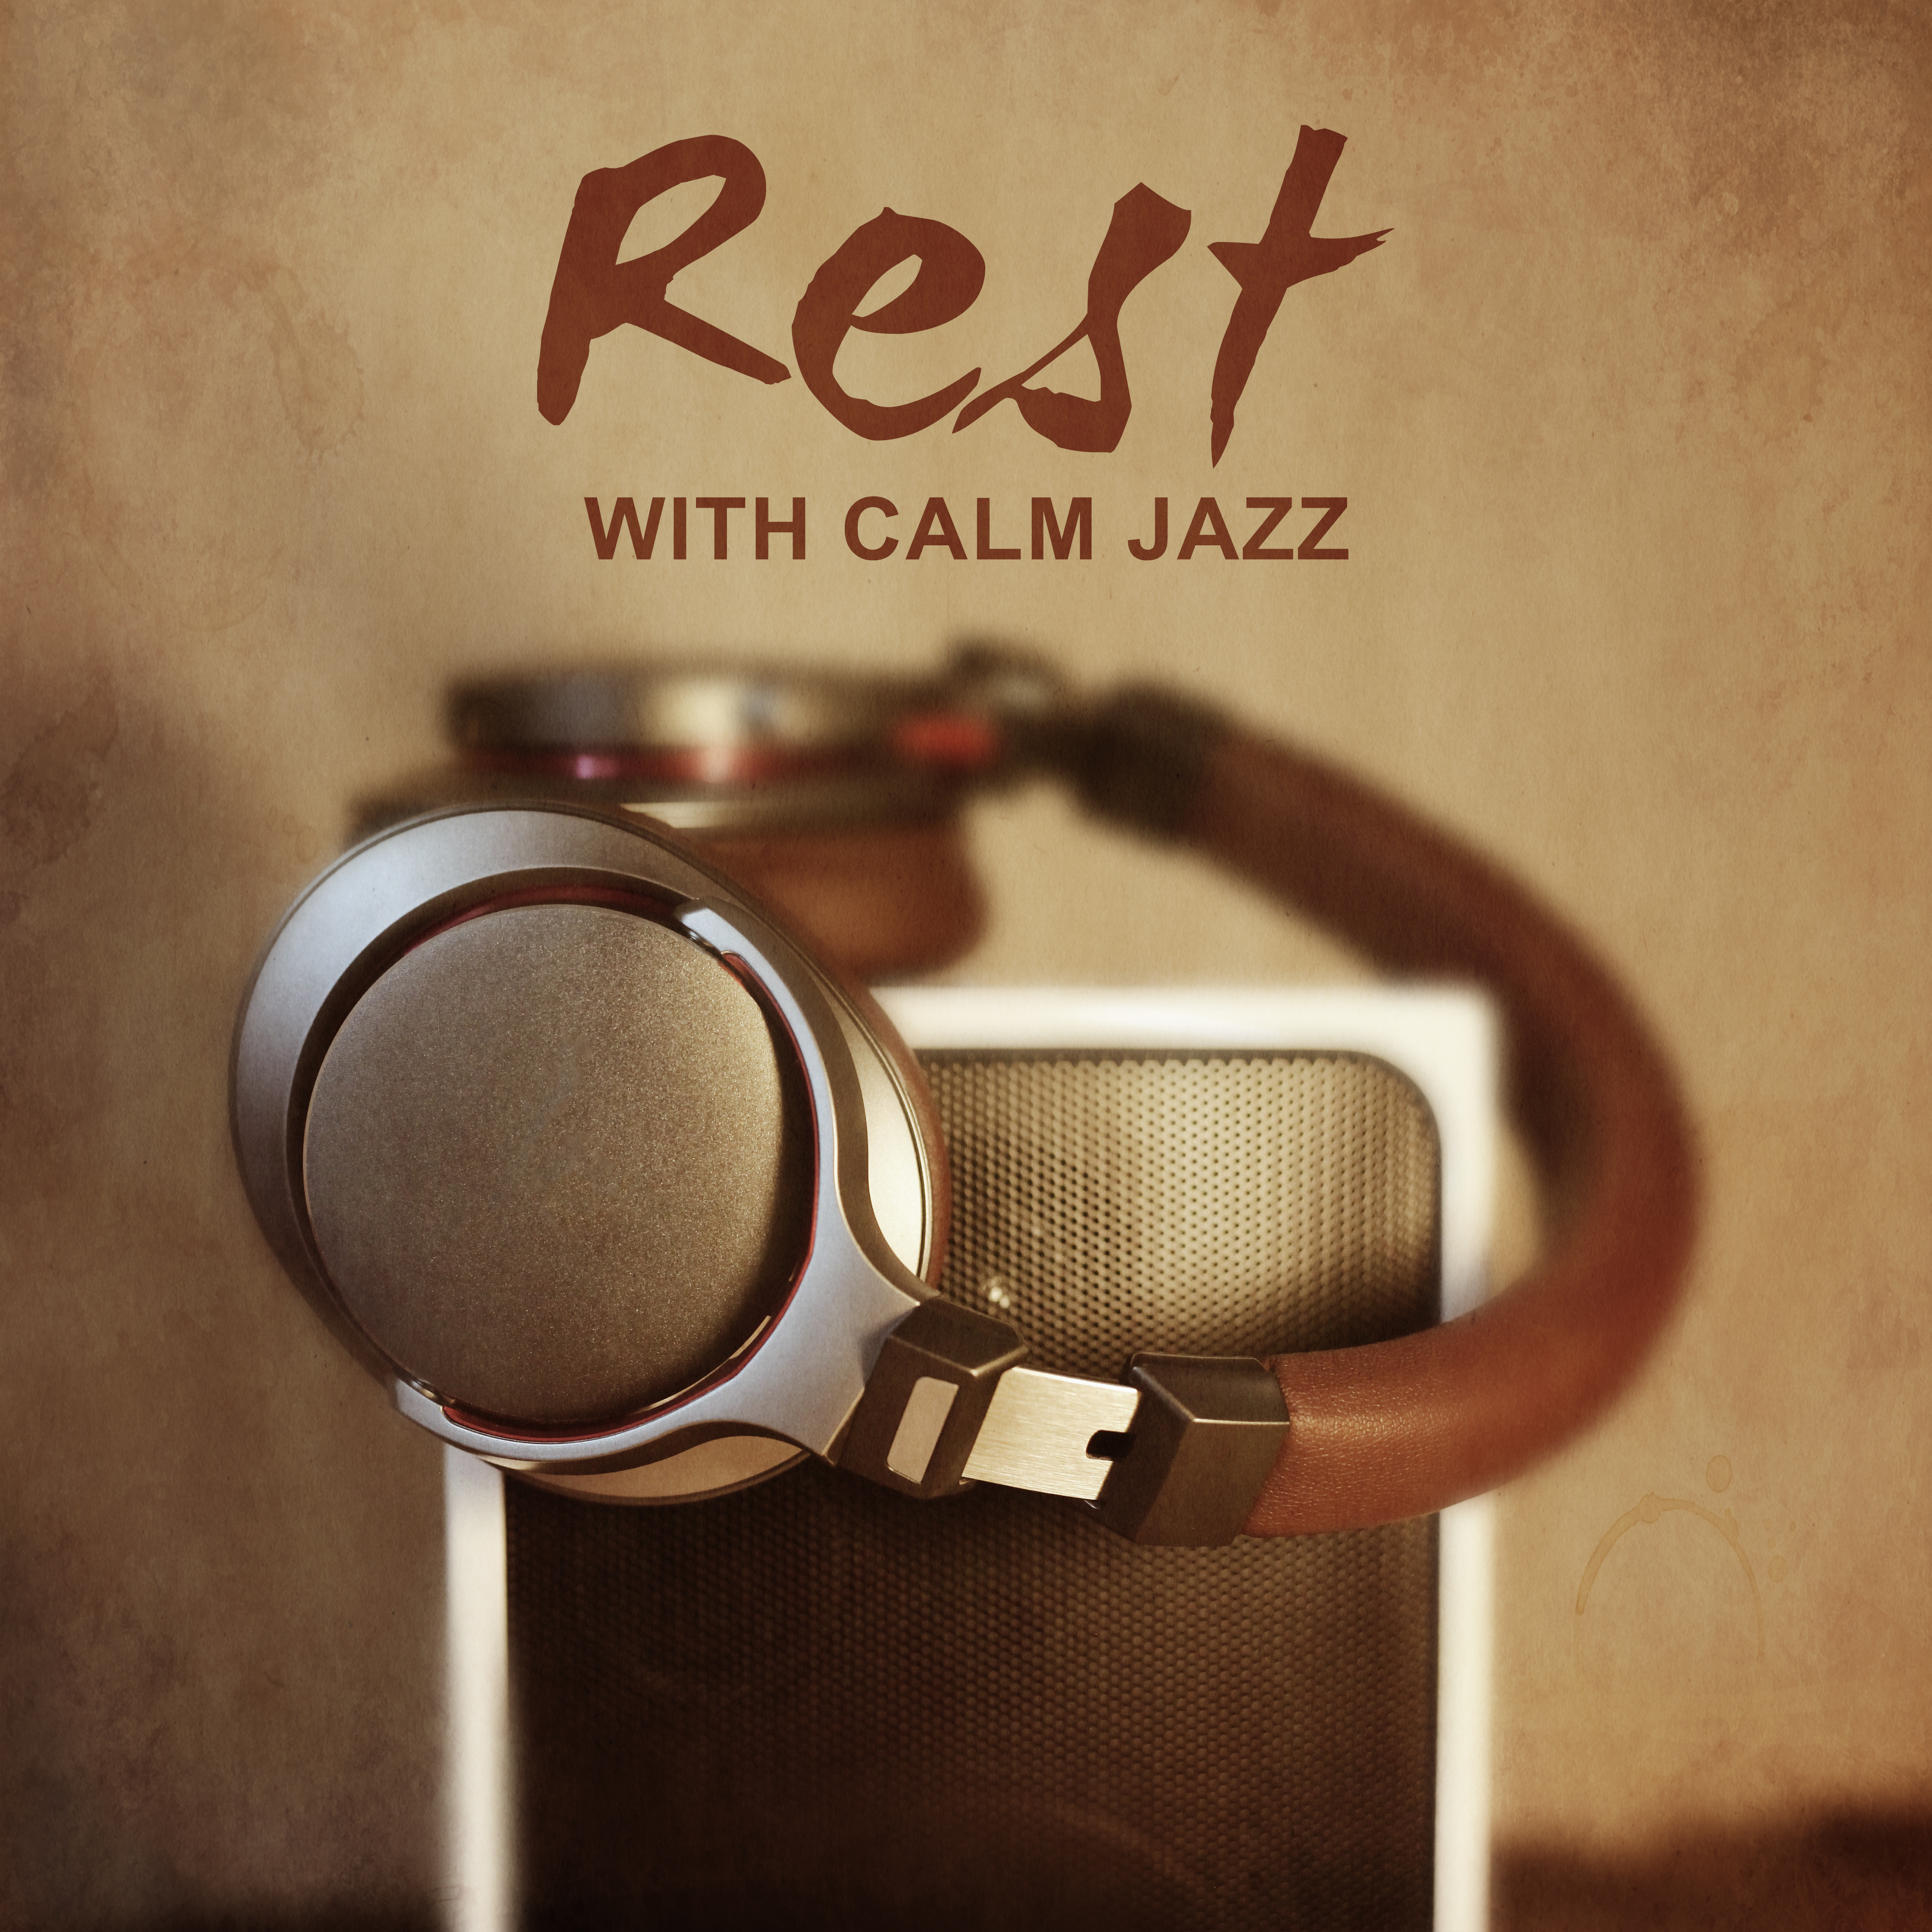 Rest with Calm Jazz  Easy Listening Jazz, Best Piano Background Music, Stress Relief, Soothing Sounds